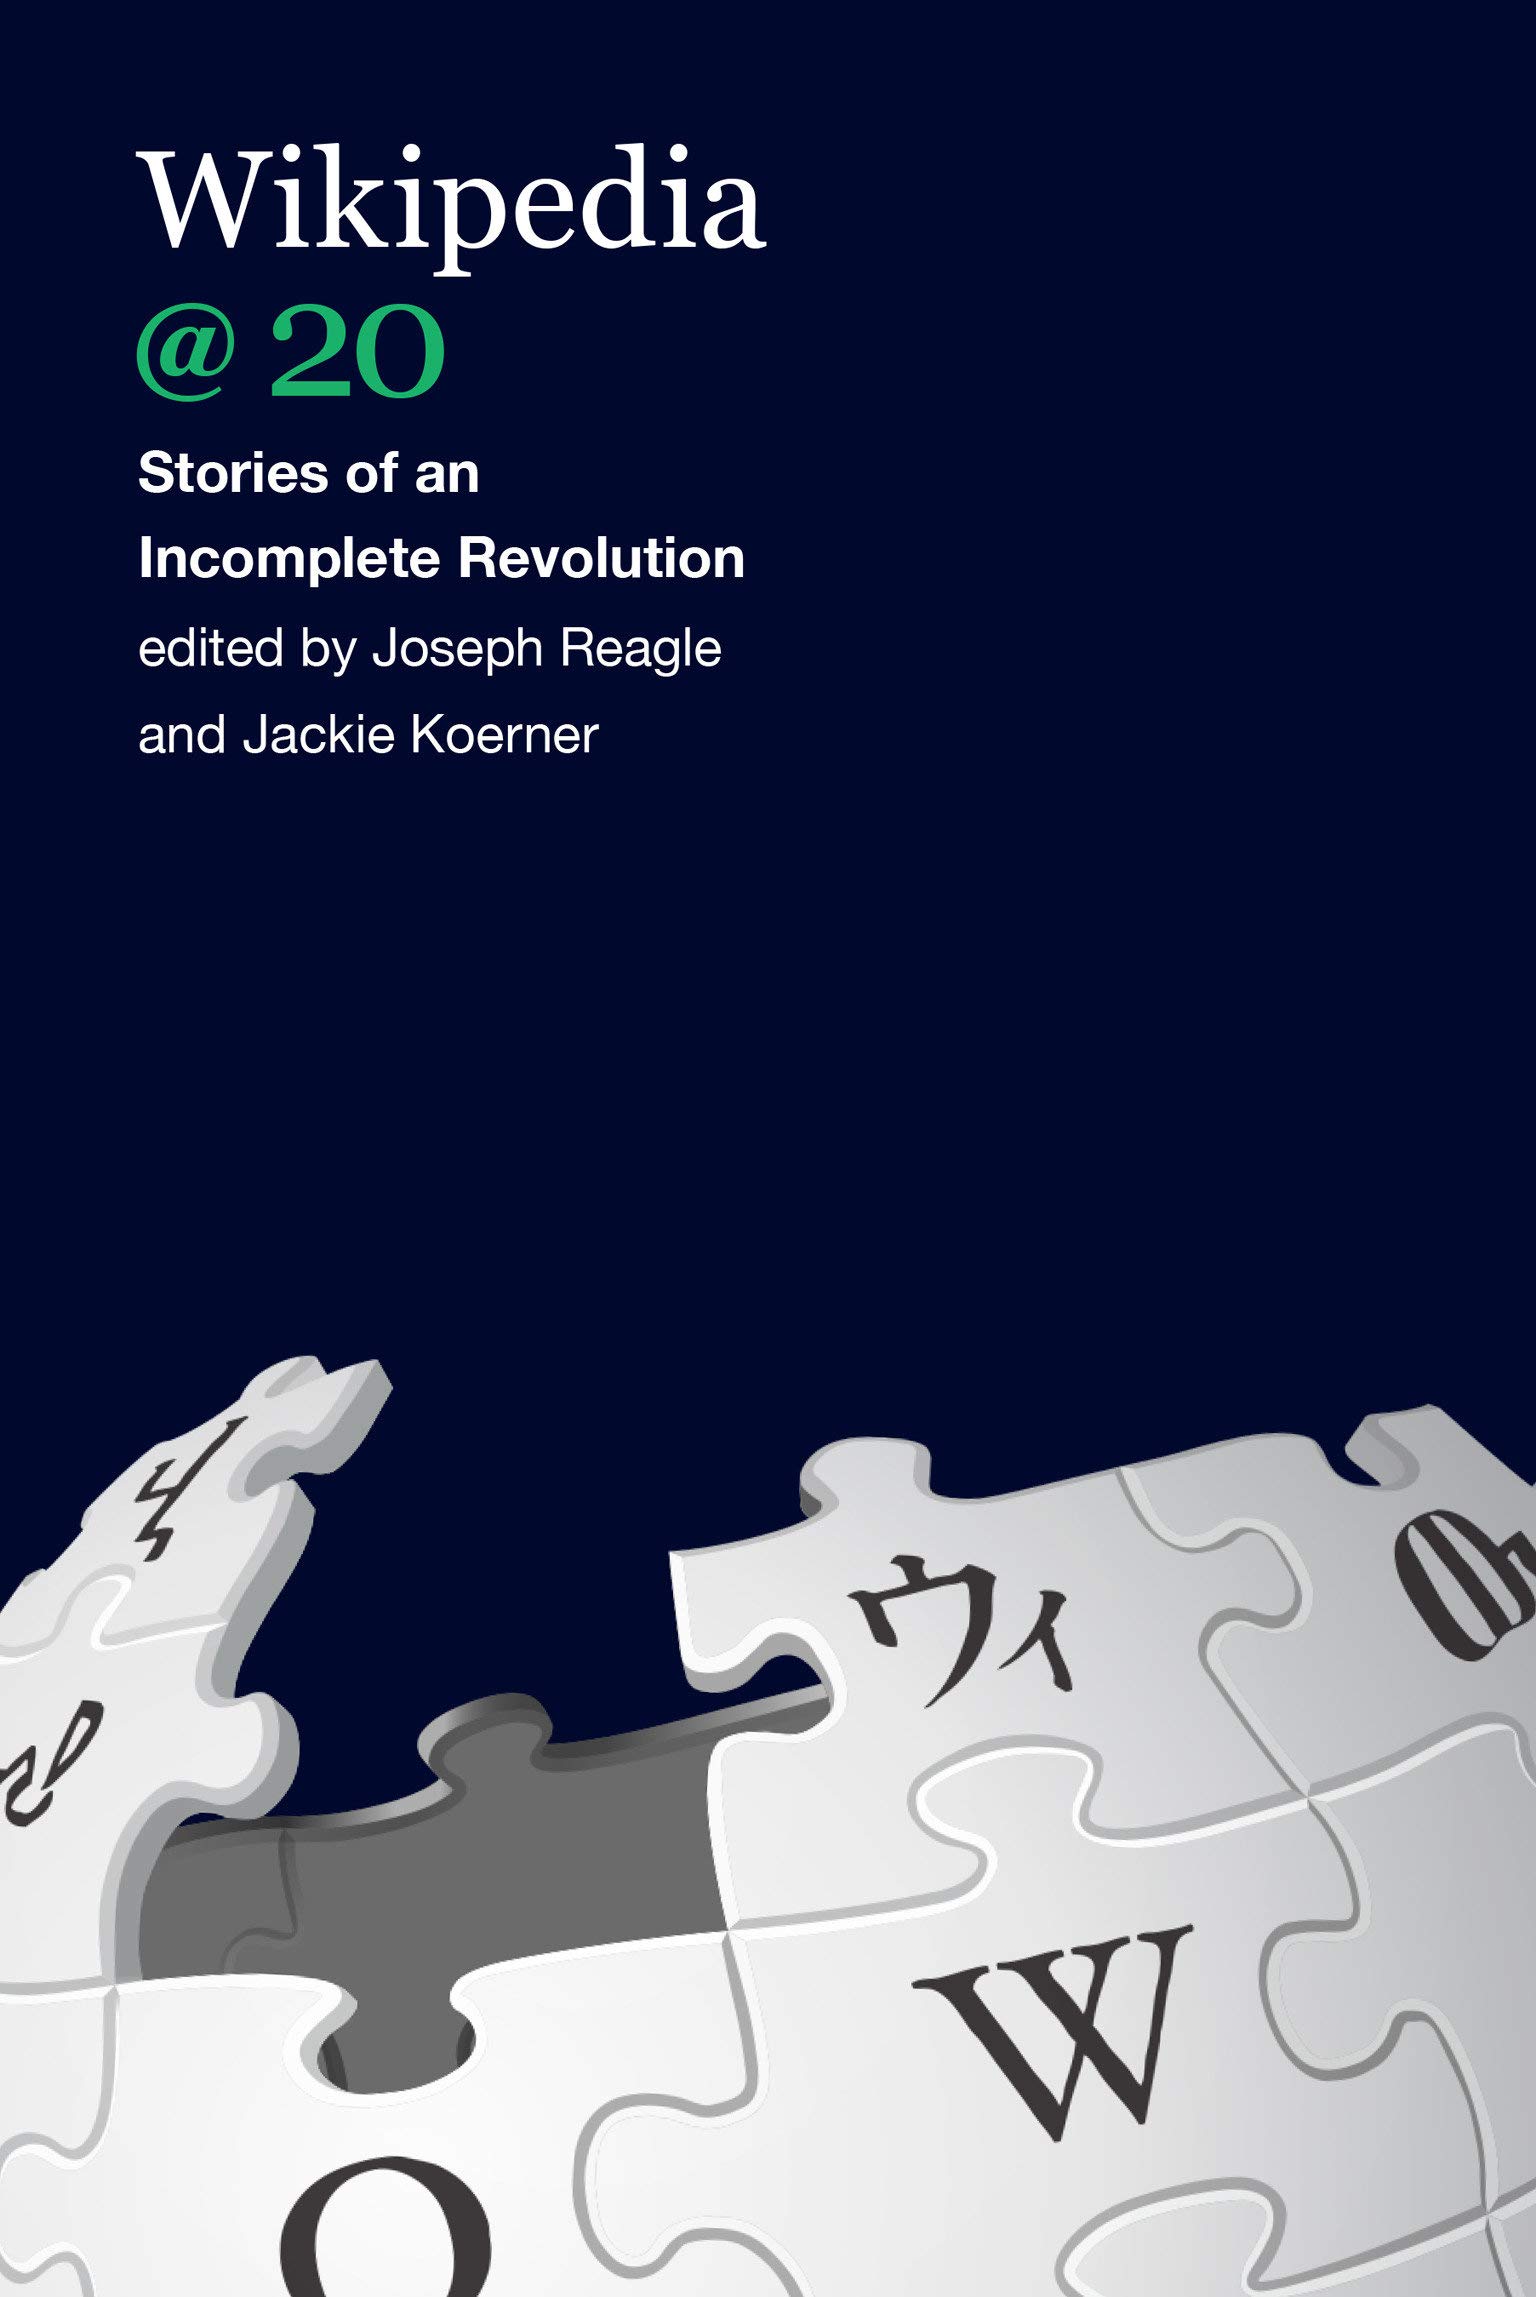 The cover of Wikipedia @ 20: Stories of an Incomplete Revolution